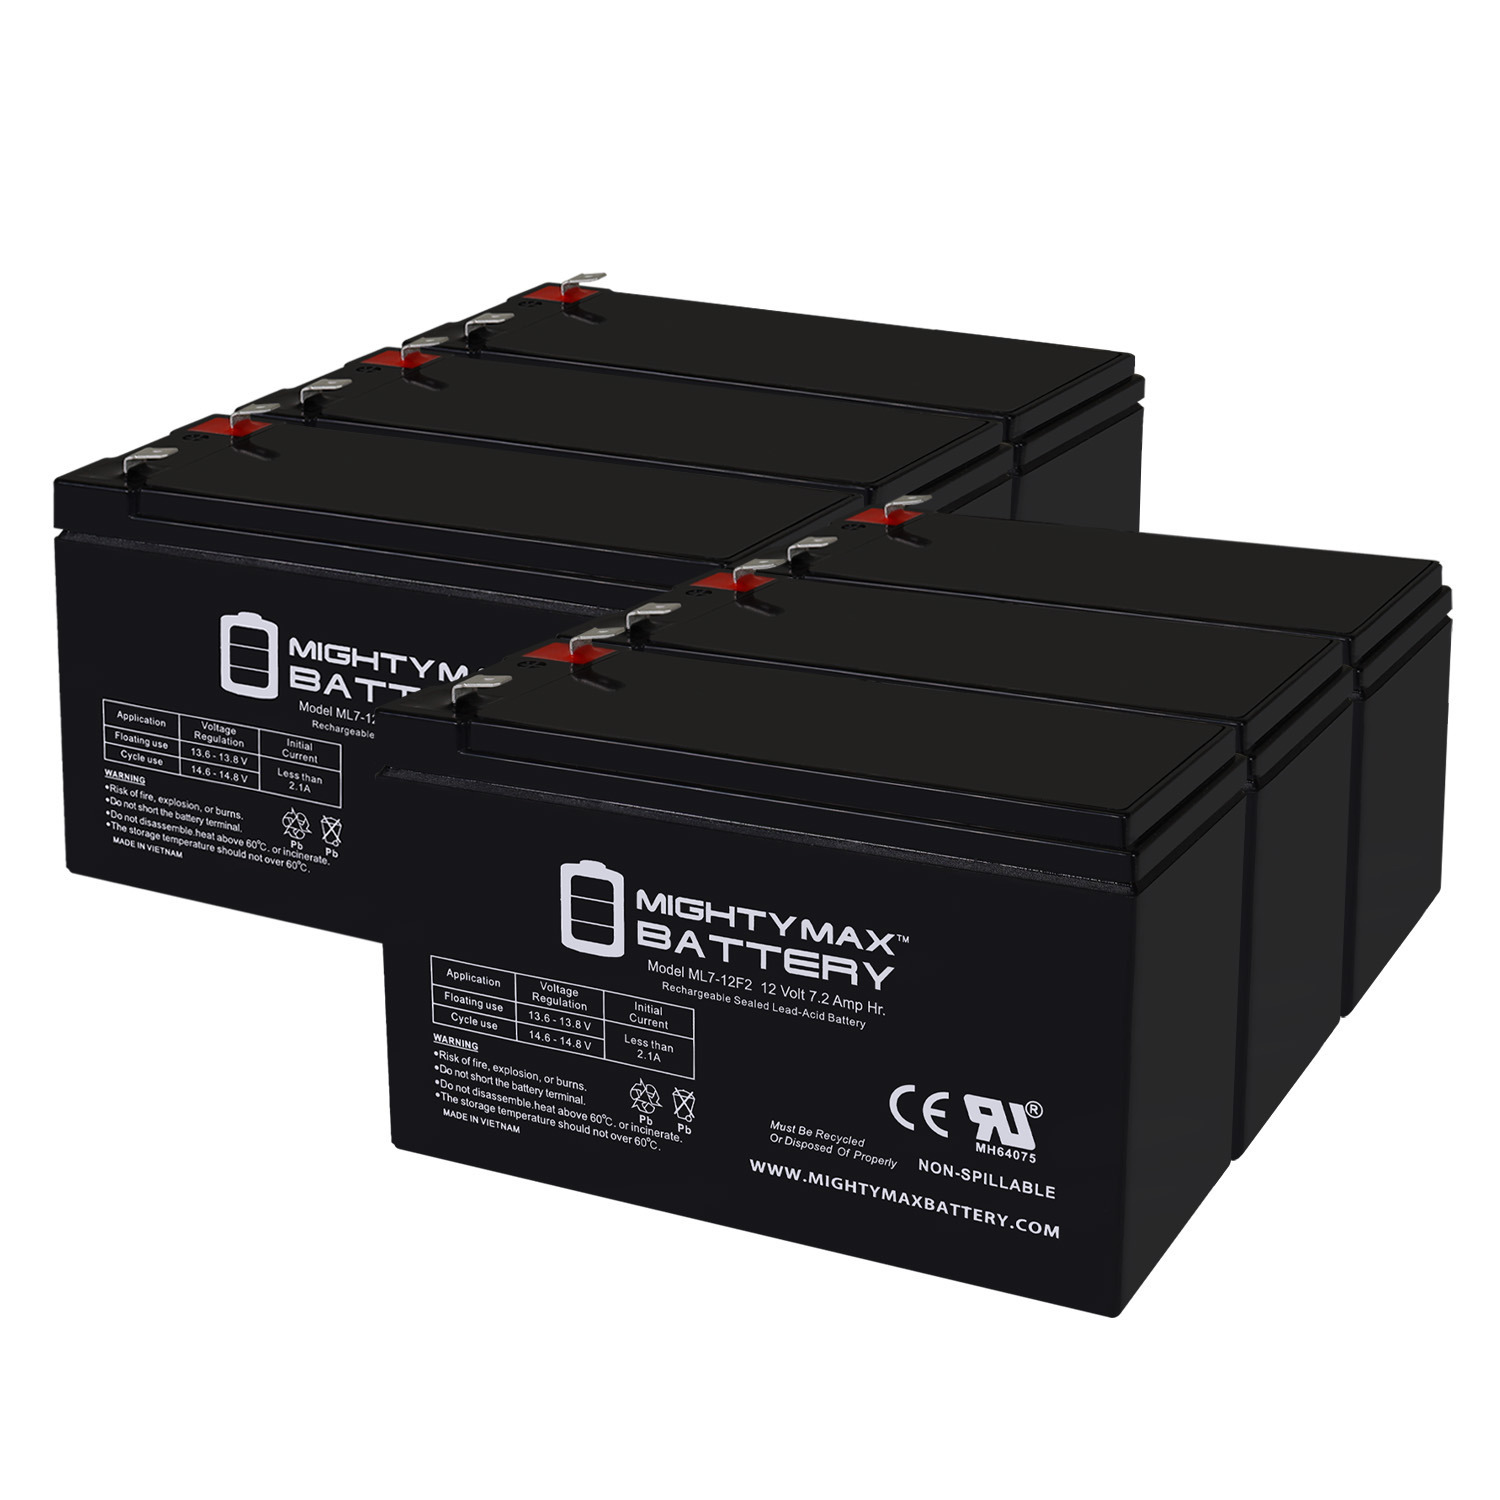 12V 7Ah F2 Replacement Battery for Minuteman MM500 CP2 - 6 Pack